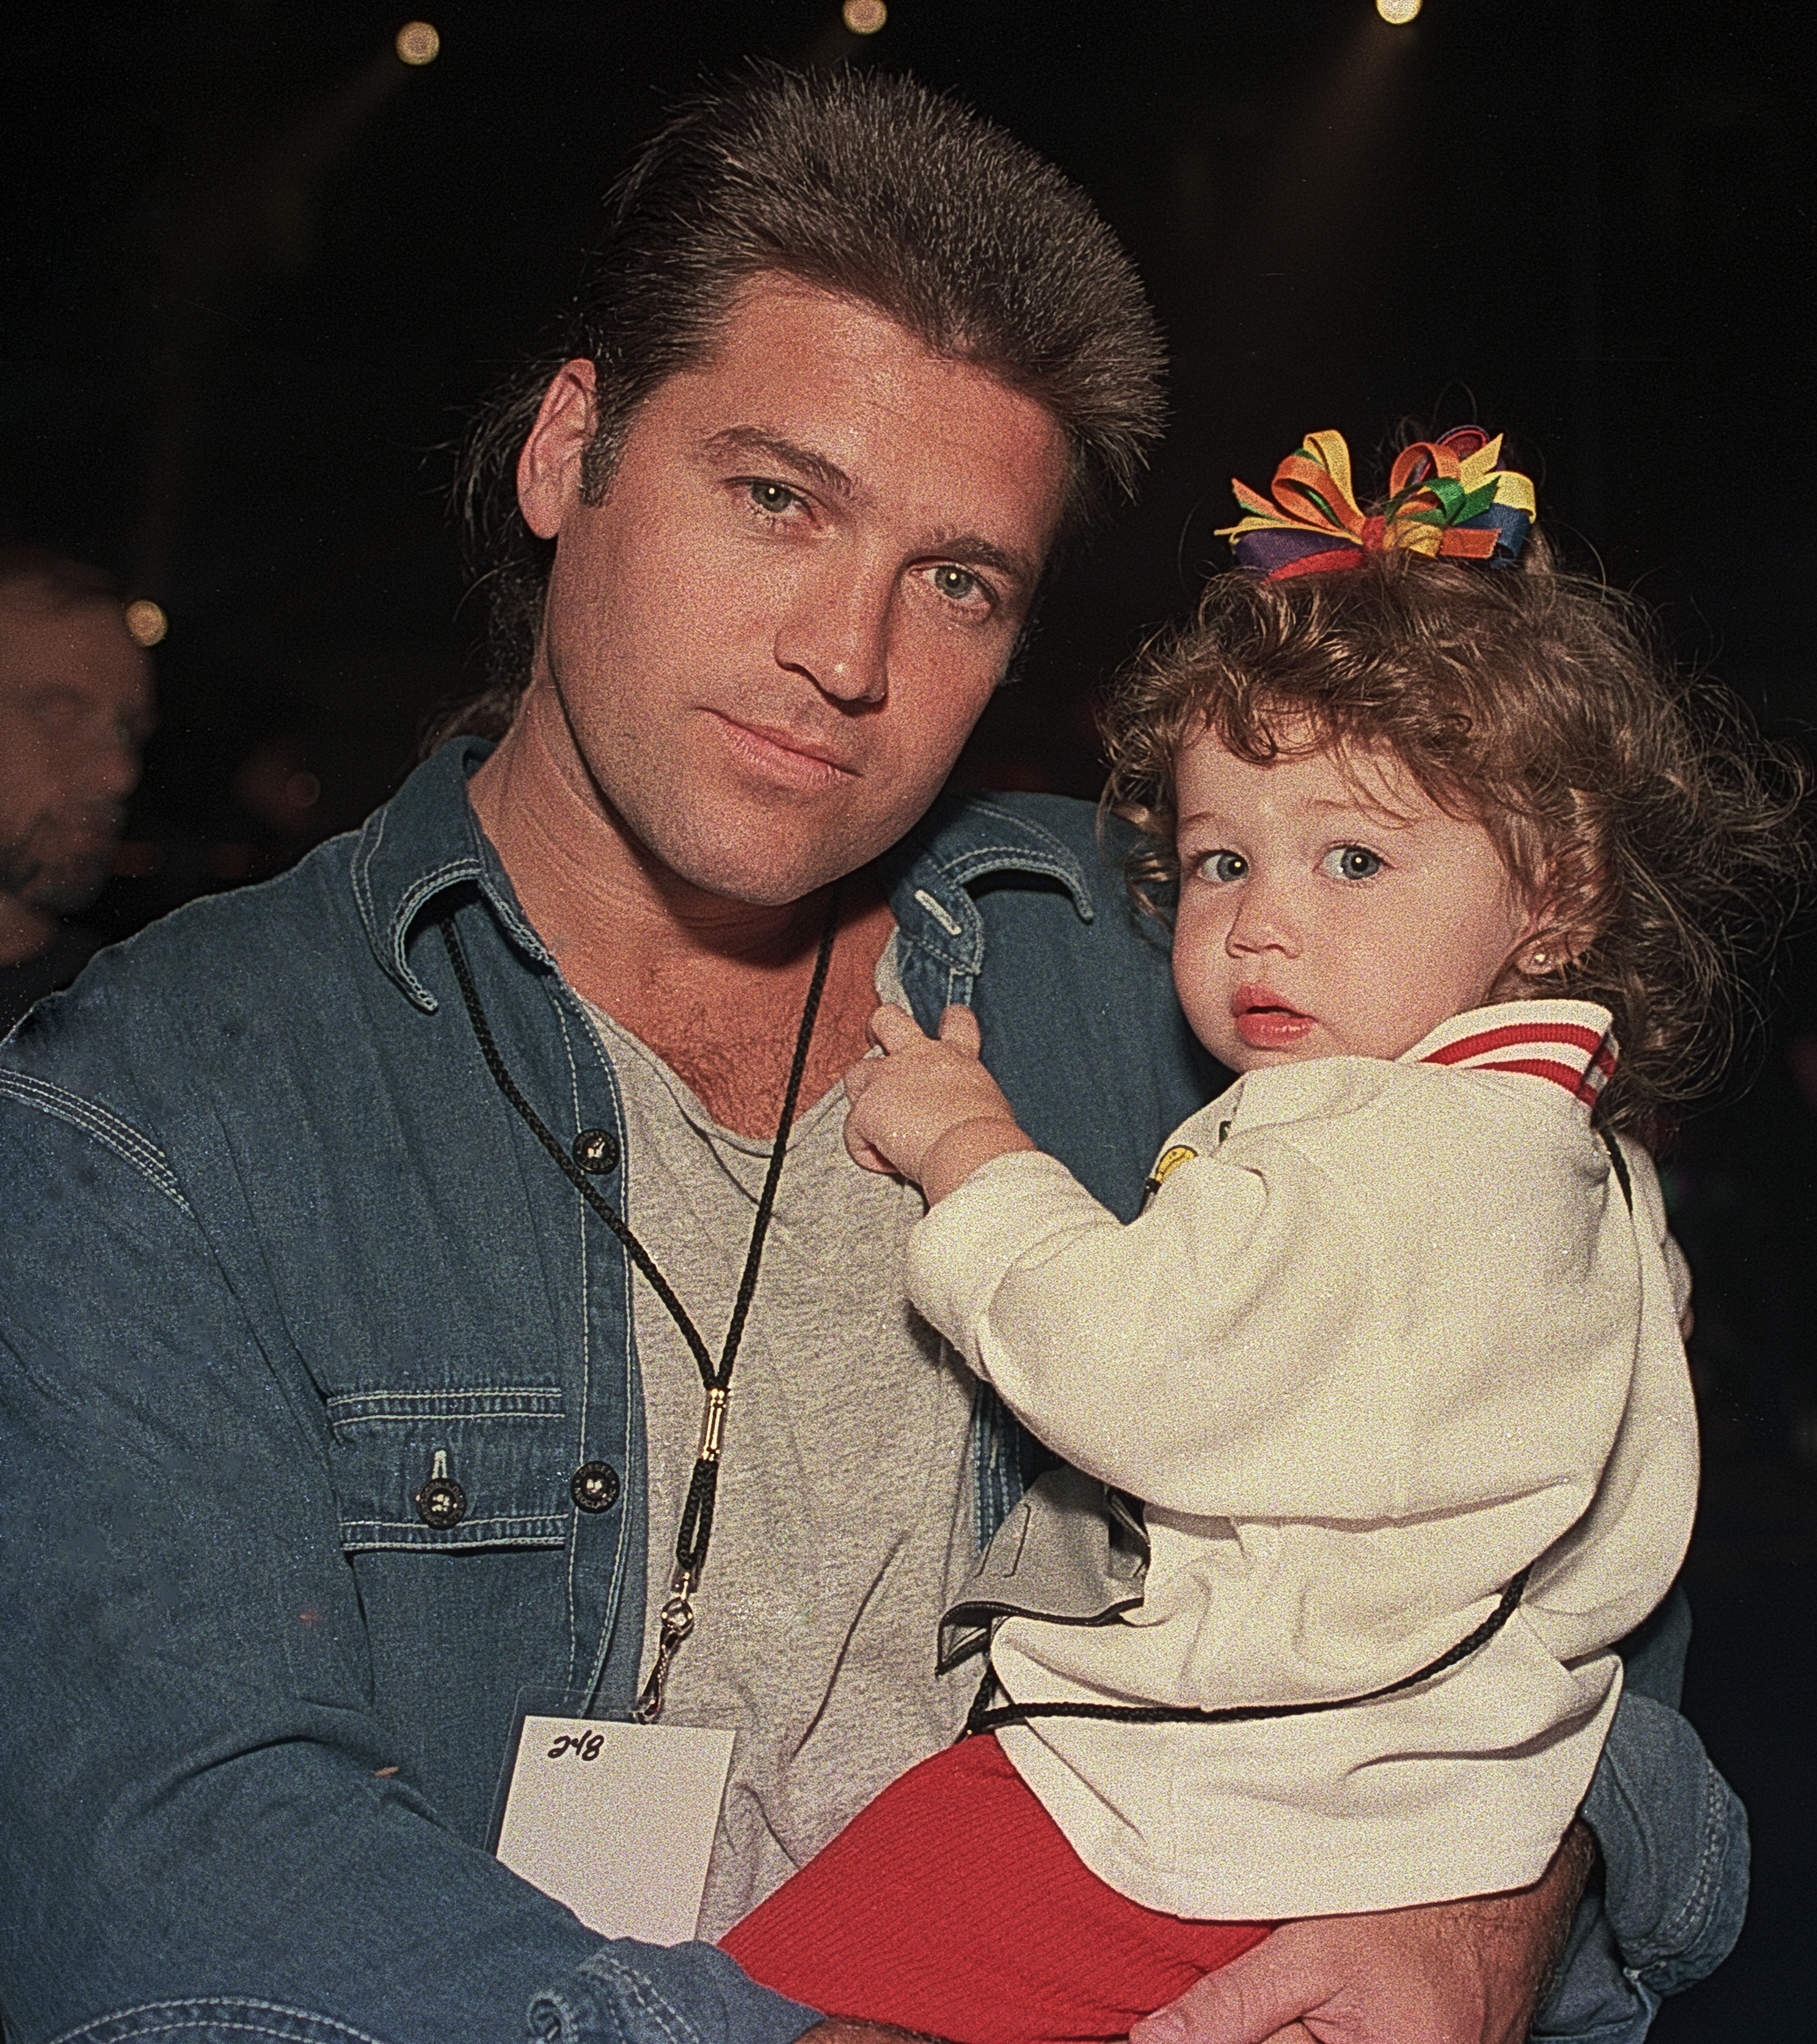 Billy Ray Cyrus and Miley Cyrus in Memphis, Tennessee on October 08, 1994 | Source: Getty Images